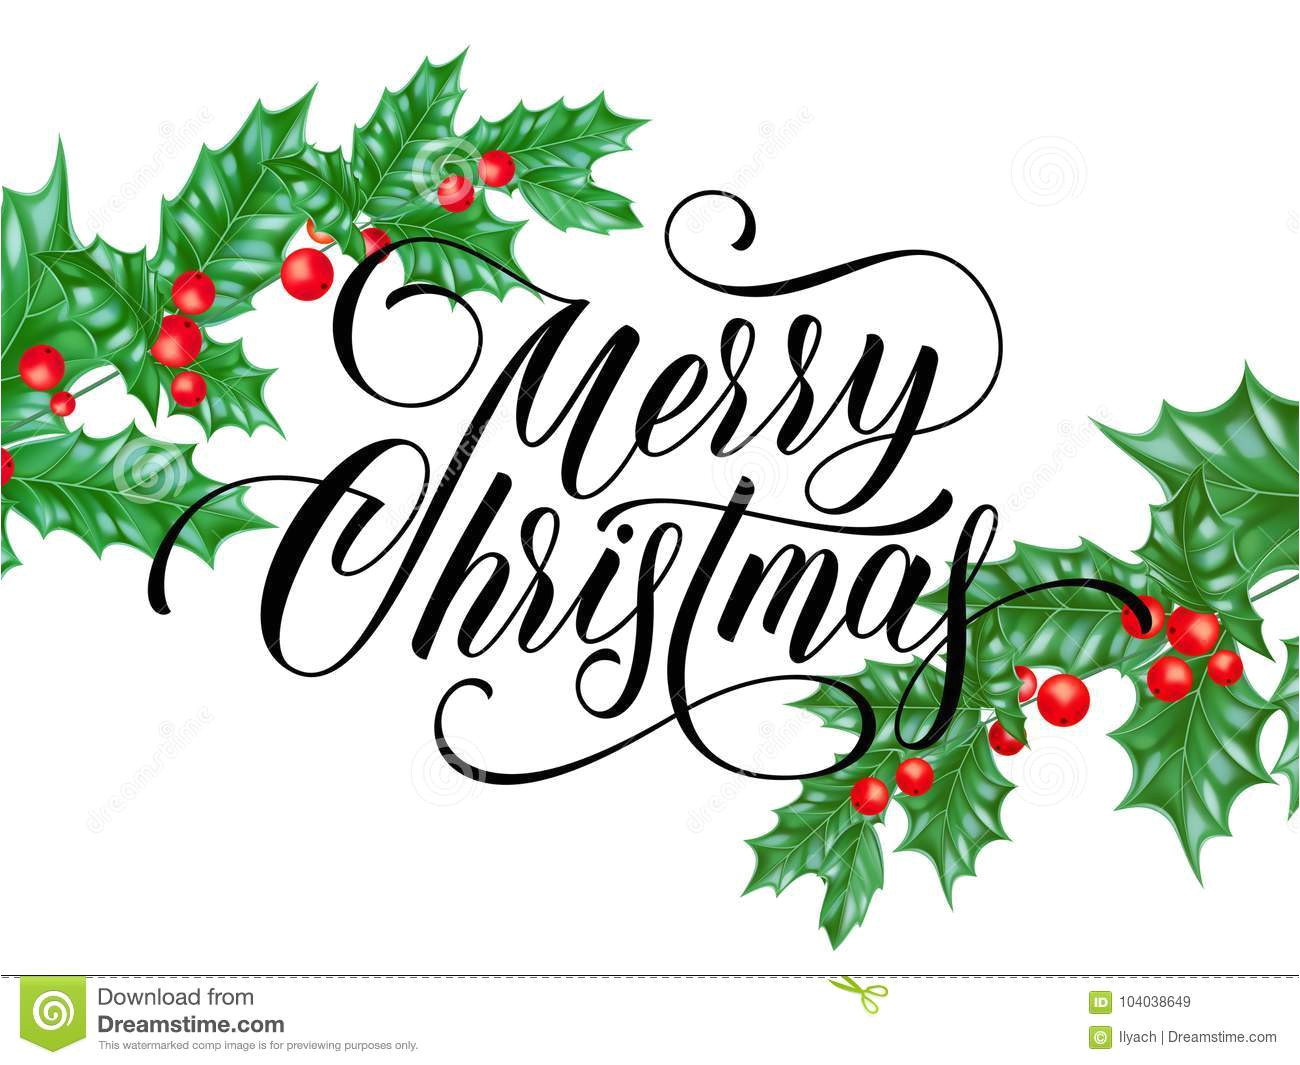 merry christmas greeting card holy snow white background vector winter holiday calligraphy wish text lettering design 104038649 jpg